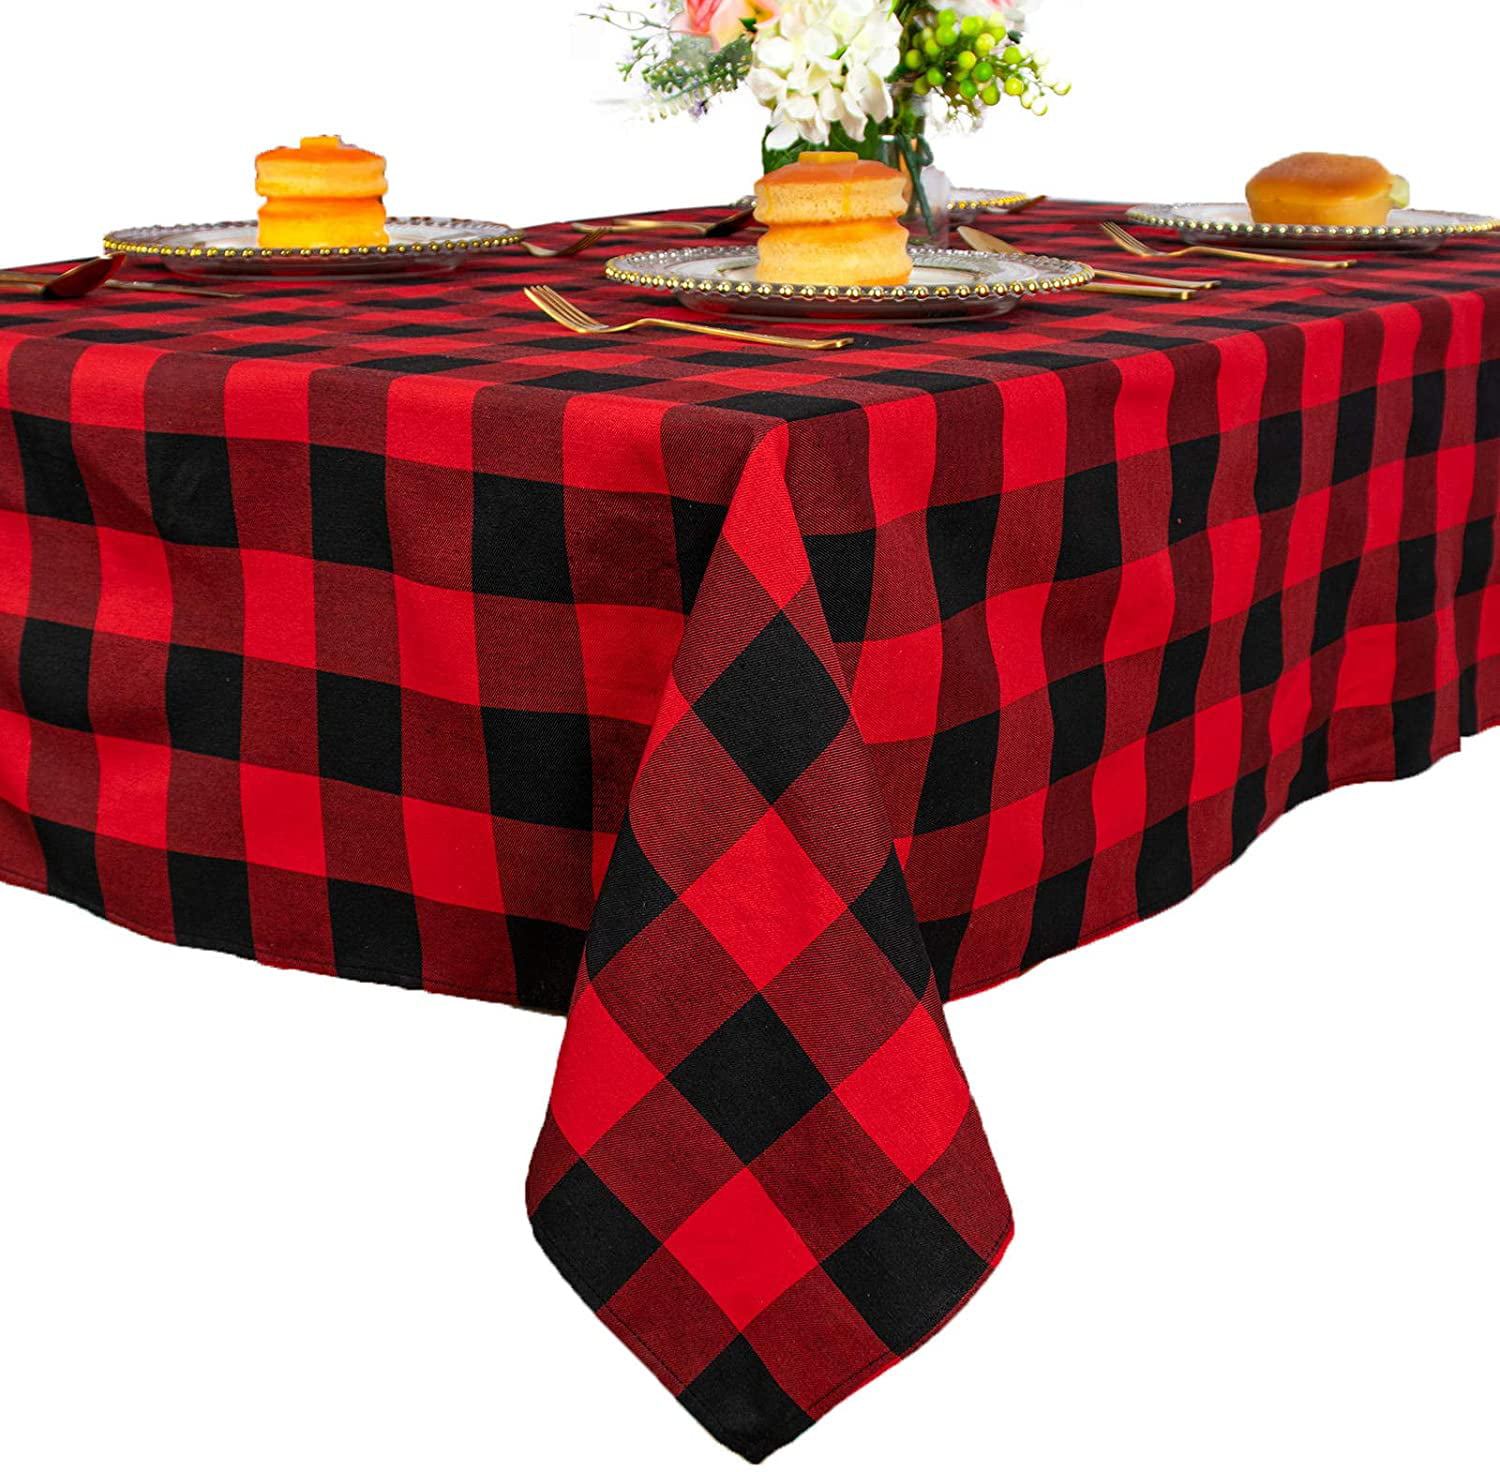 Red Black Checkered Round Tablecloth Cotton Linen Dining Table Cloth Party Decor